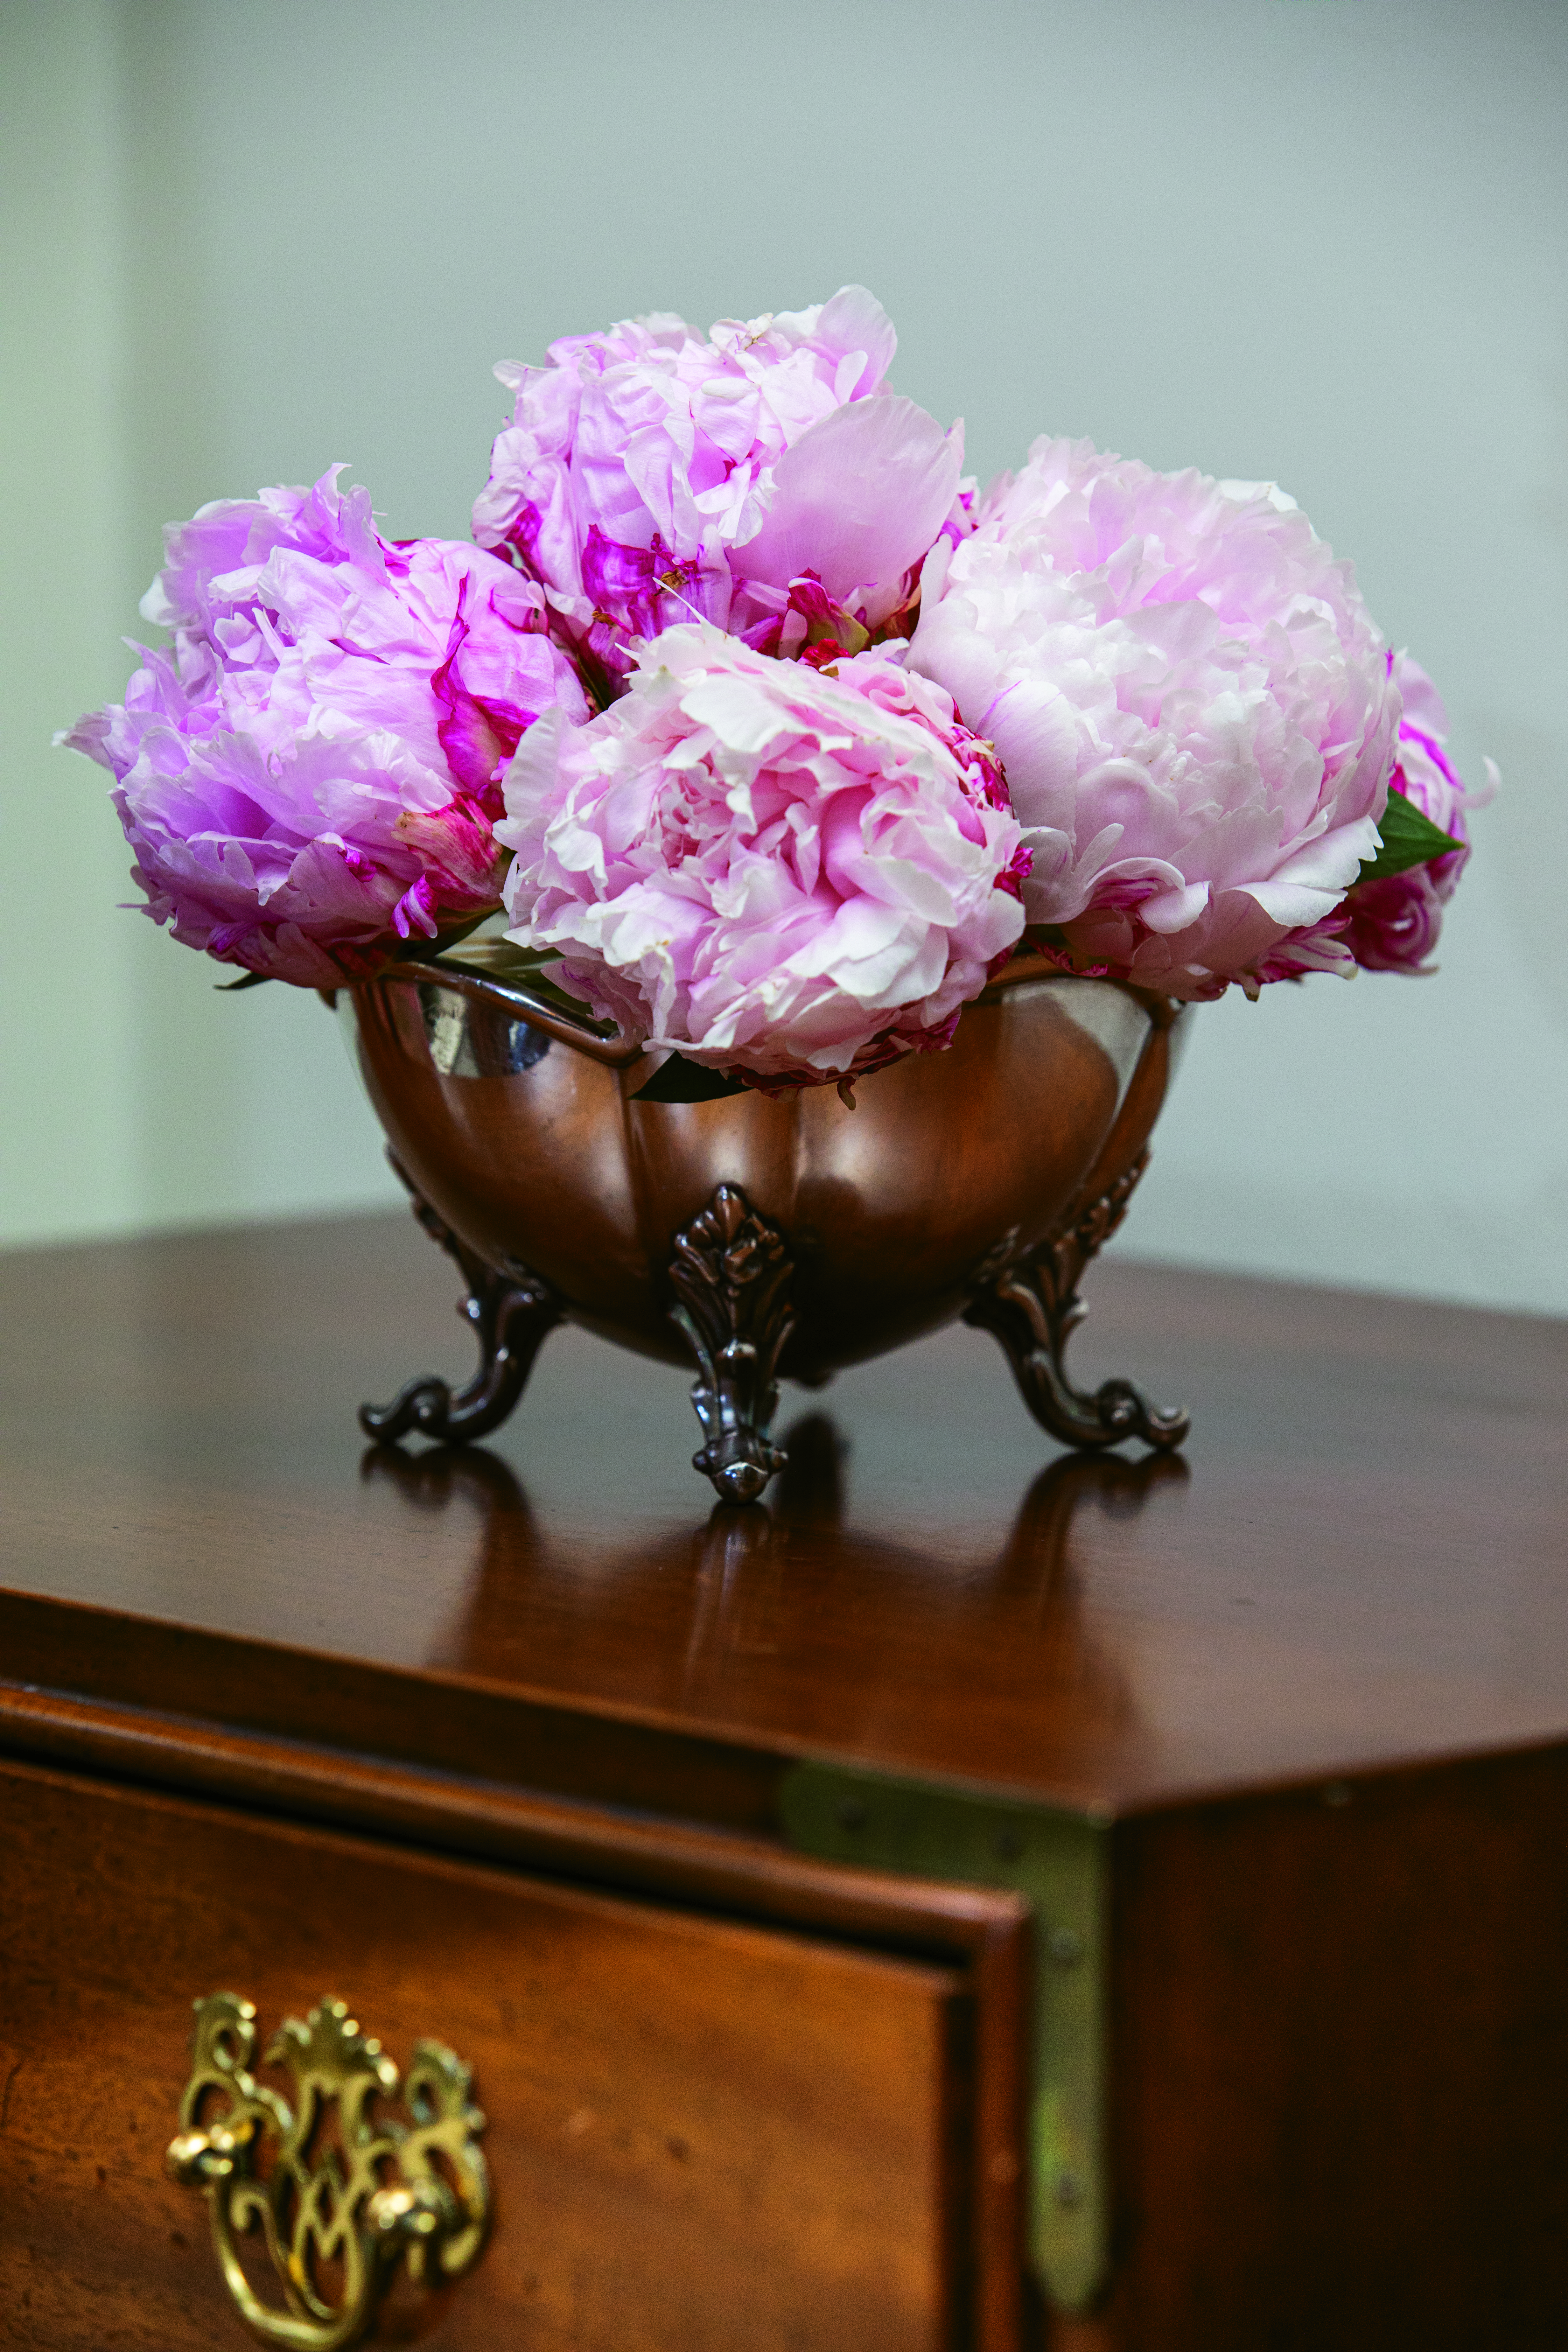 Peonies are supported in a silver dish with clear florist tape crisscrossed across the top. Once fully opened, the blooms will be a breathtaking flutter of pink confection! 